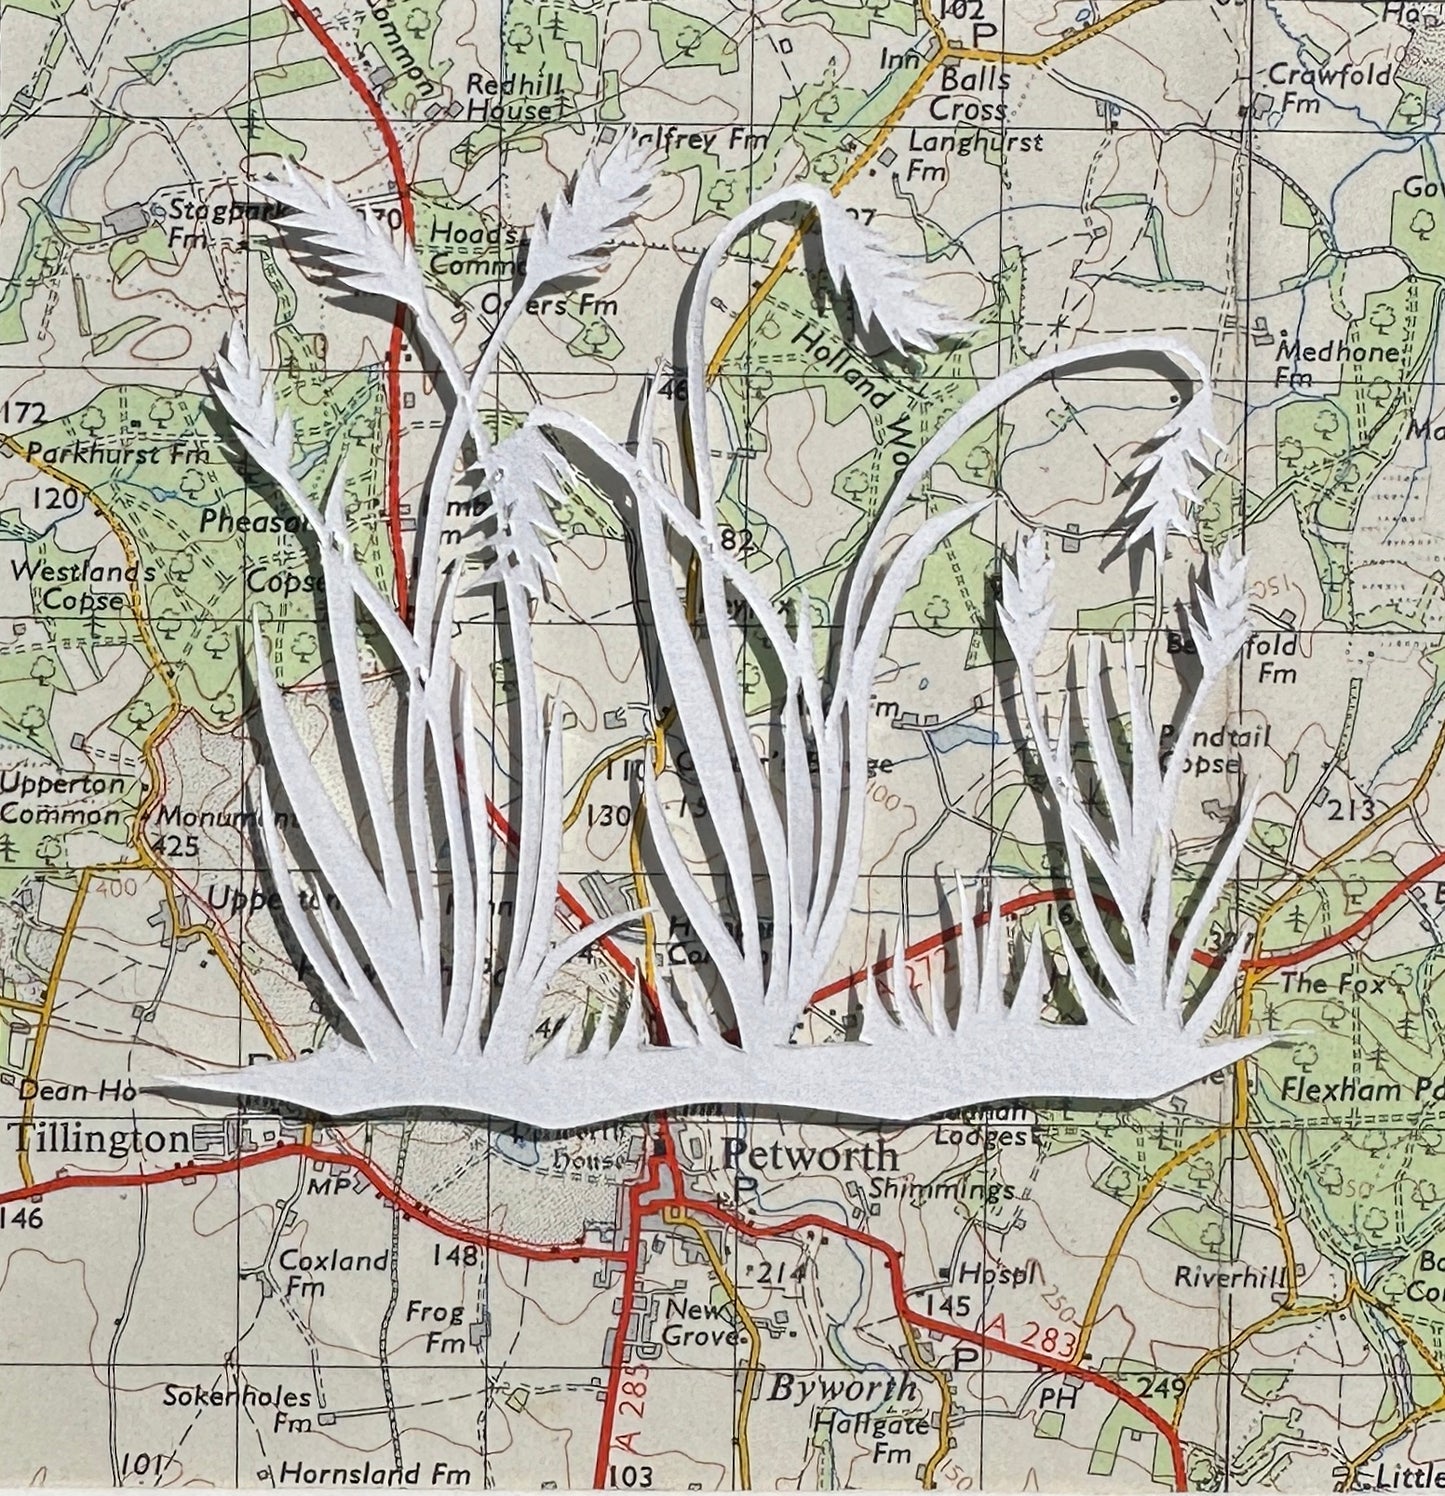 Papercut showing group of ornamental grasses over an OS map extract